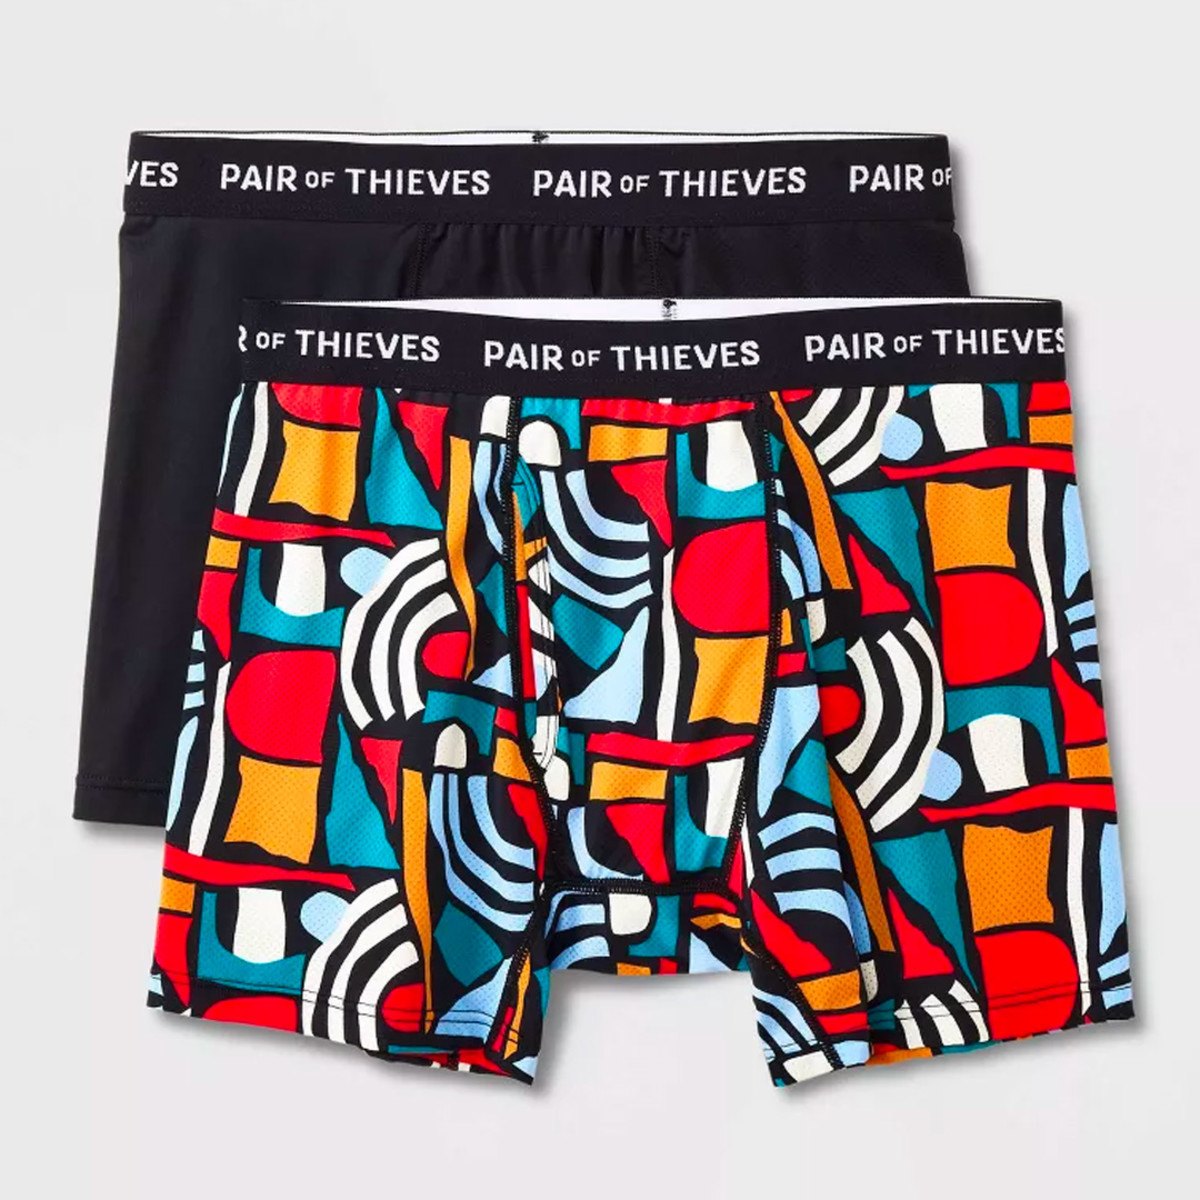 Pair of Thieves Cotton Boxer Briefs for Men Pack (4 Pack) - Tagless